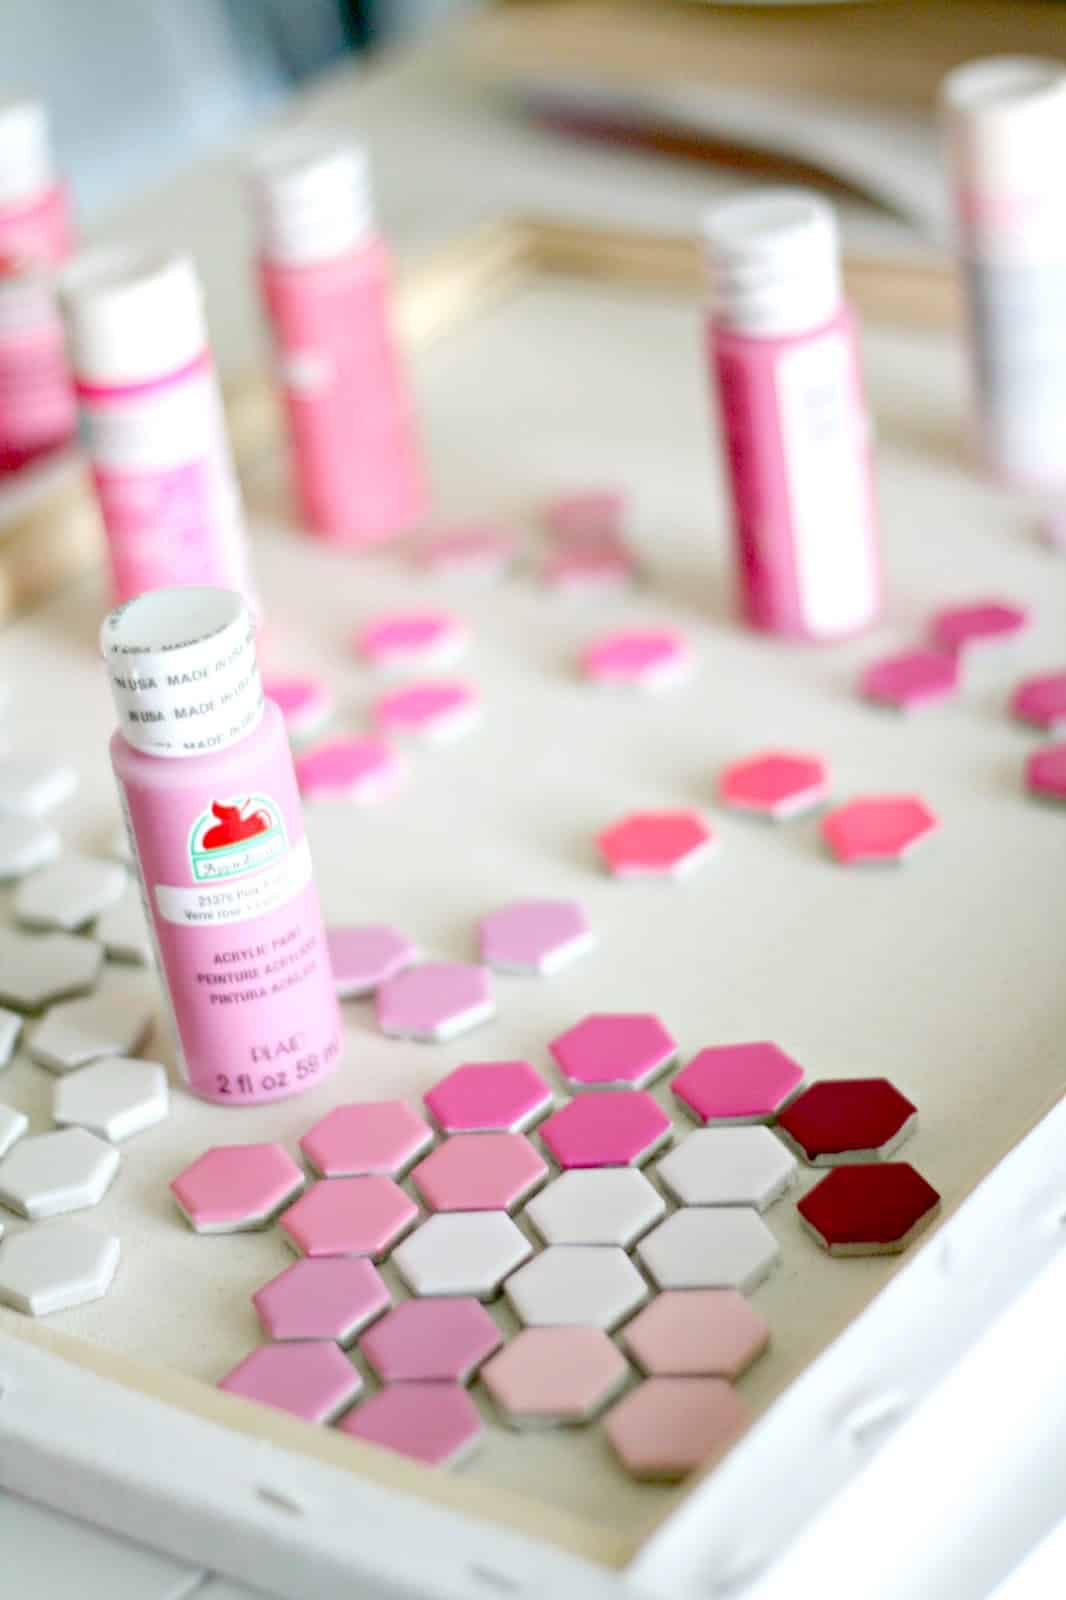 Hexagon tiles painted with various shades of pink and red paint with paint bottles in the background